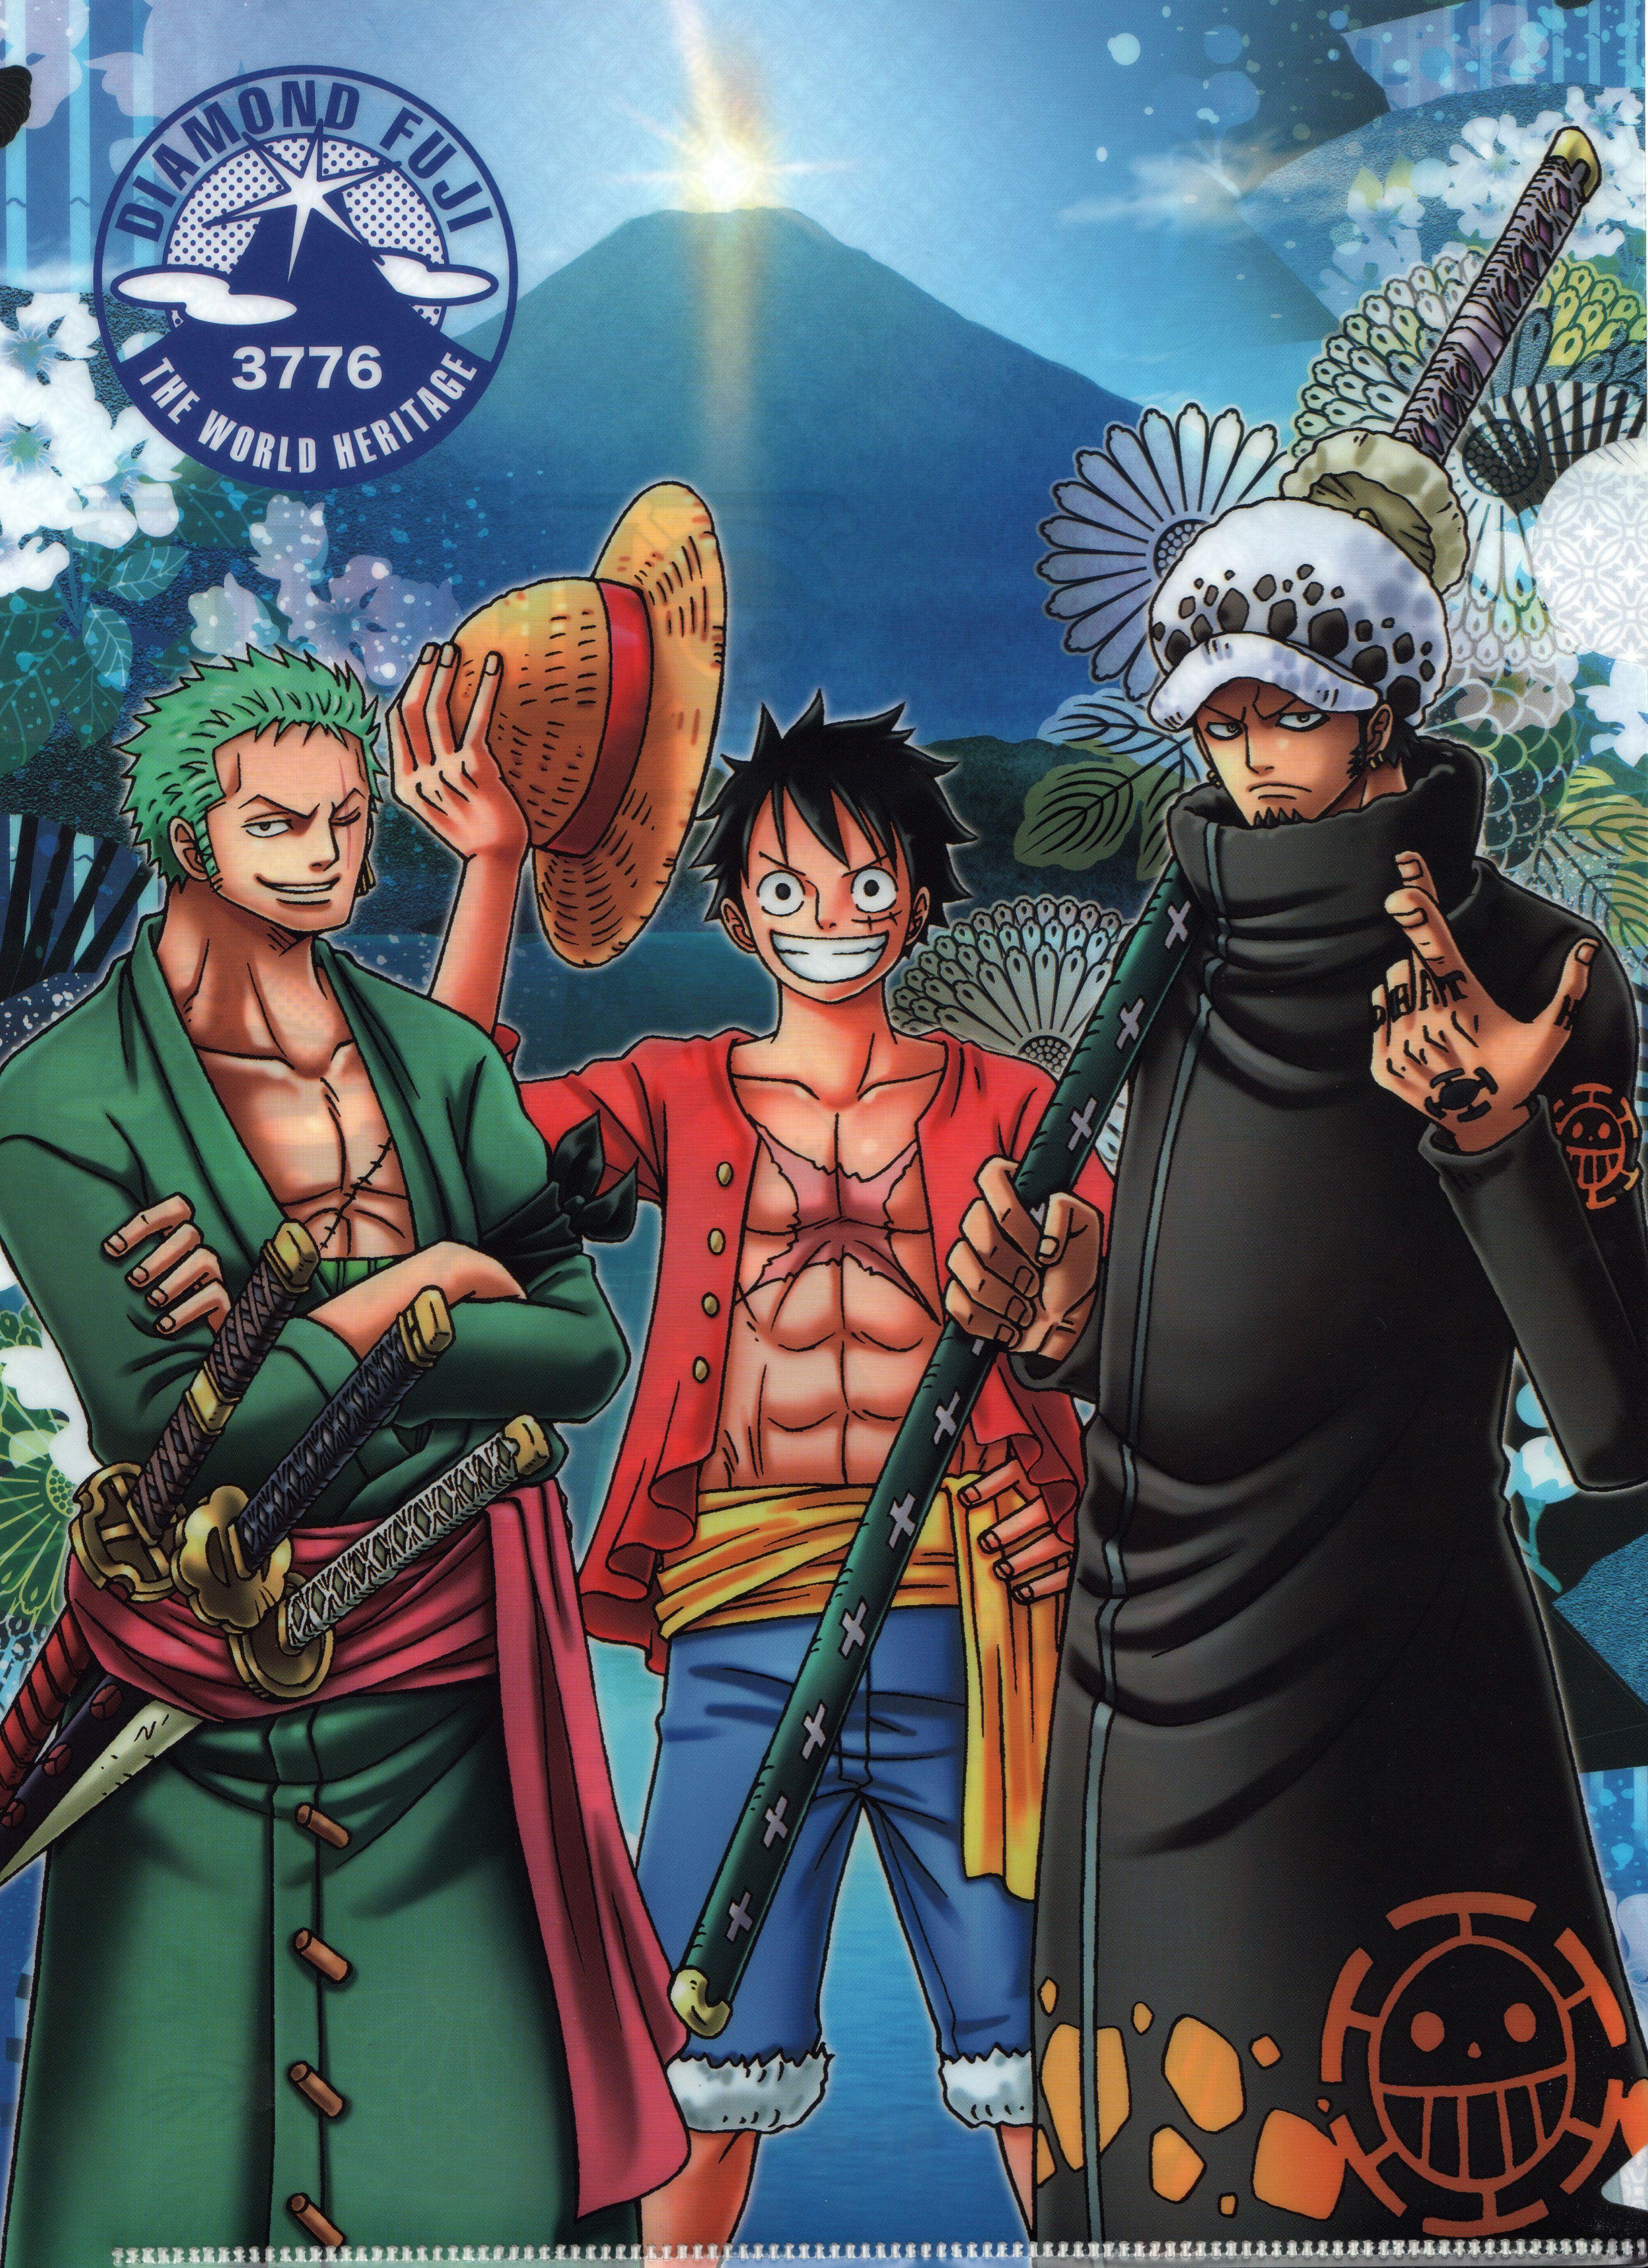 Cool One Piece Wallpaper Zoro And Luffy - Showing all images tagged one ...